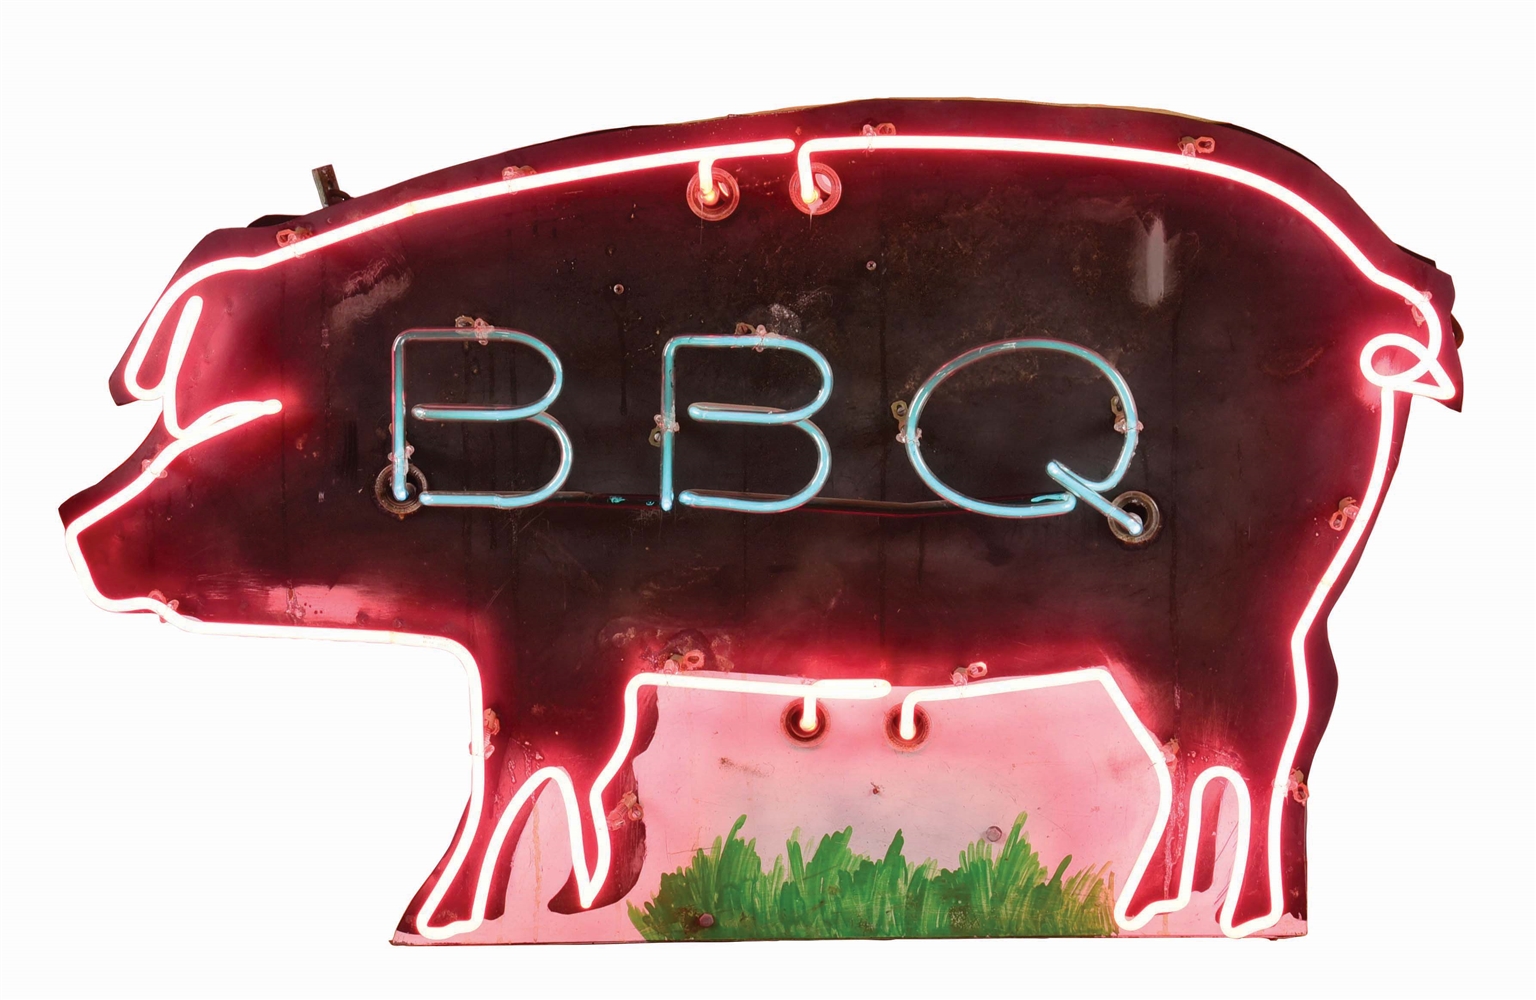 UNIQUE & OUTSTANDING DIE CUT TIN BBQ NEON SIGN W/ PIG GRAPHIC. 